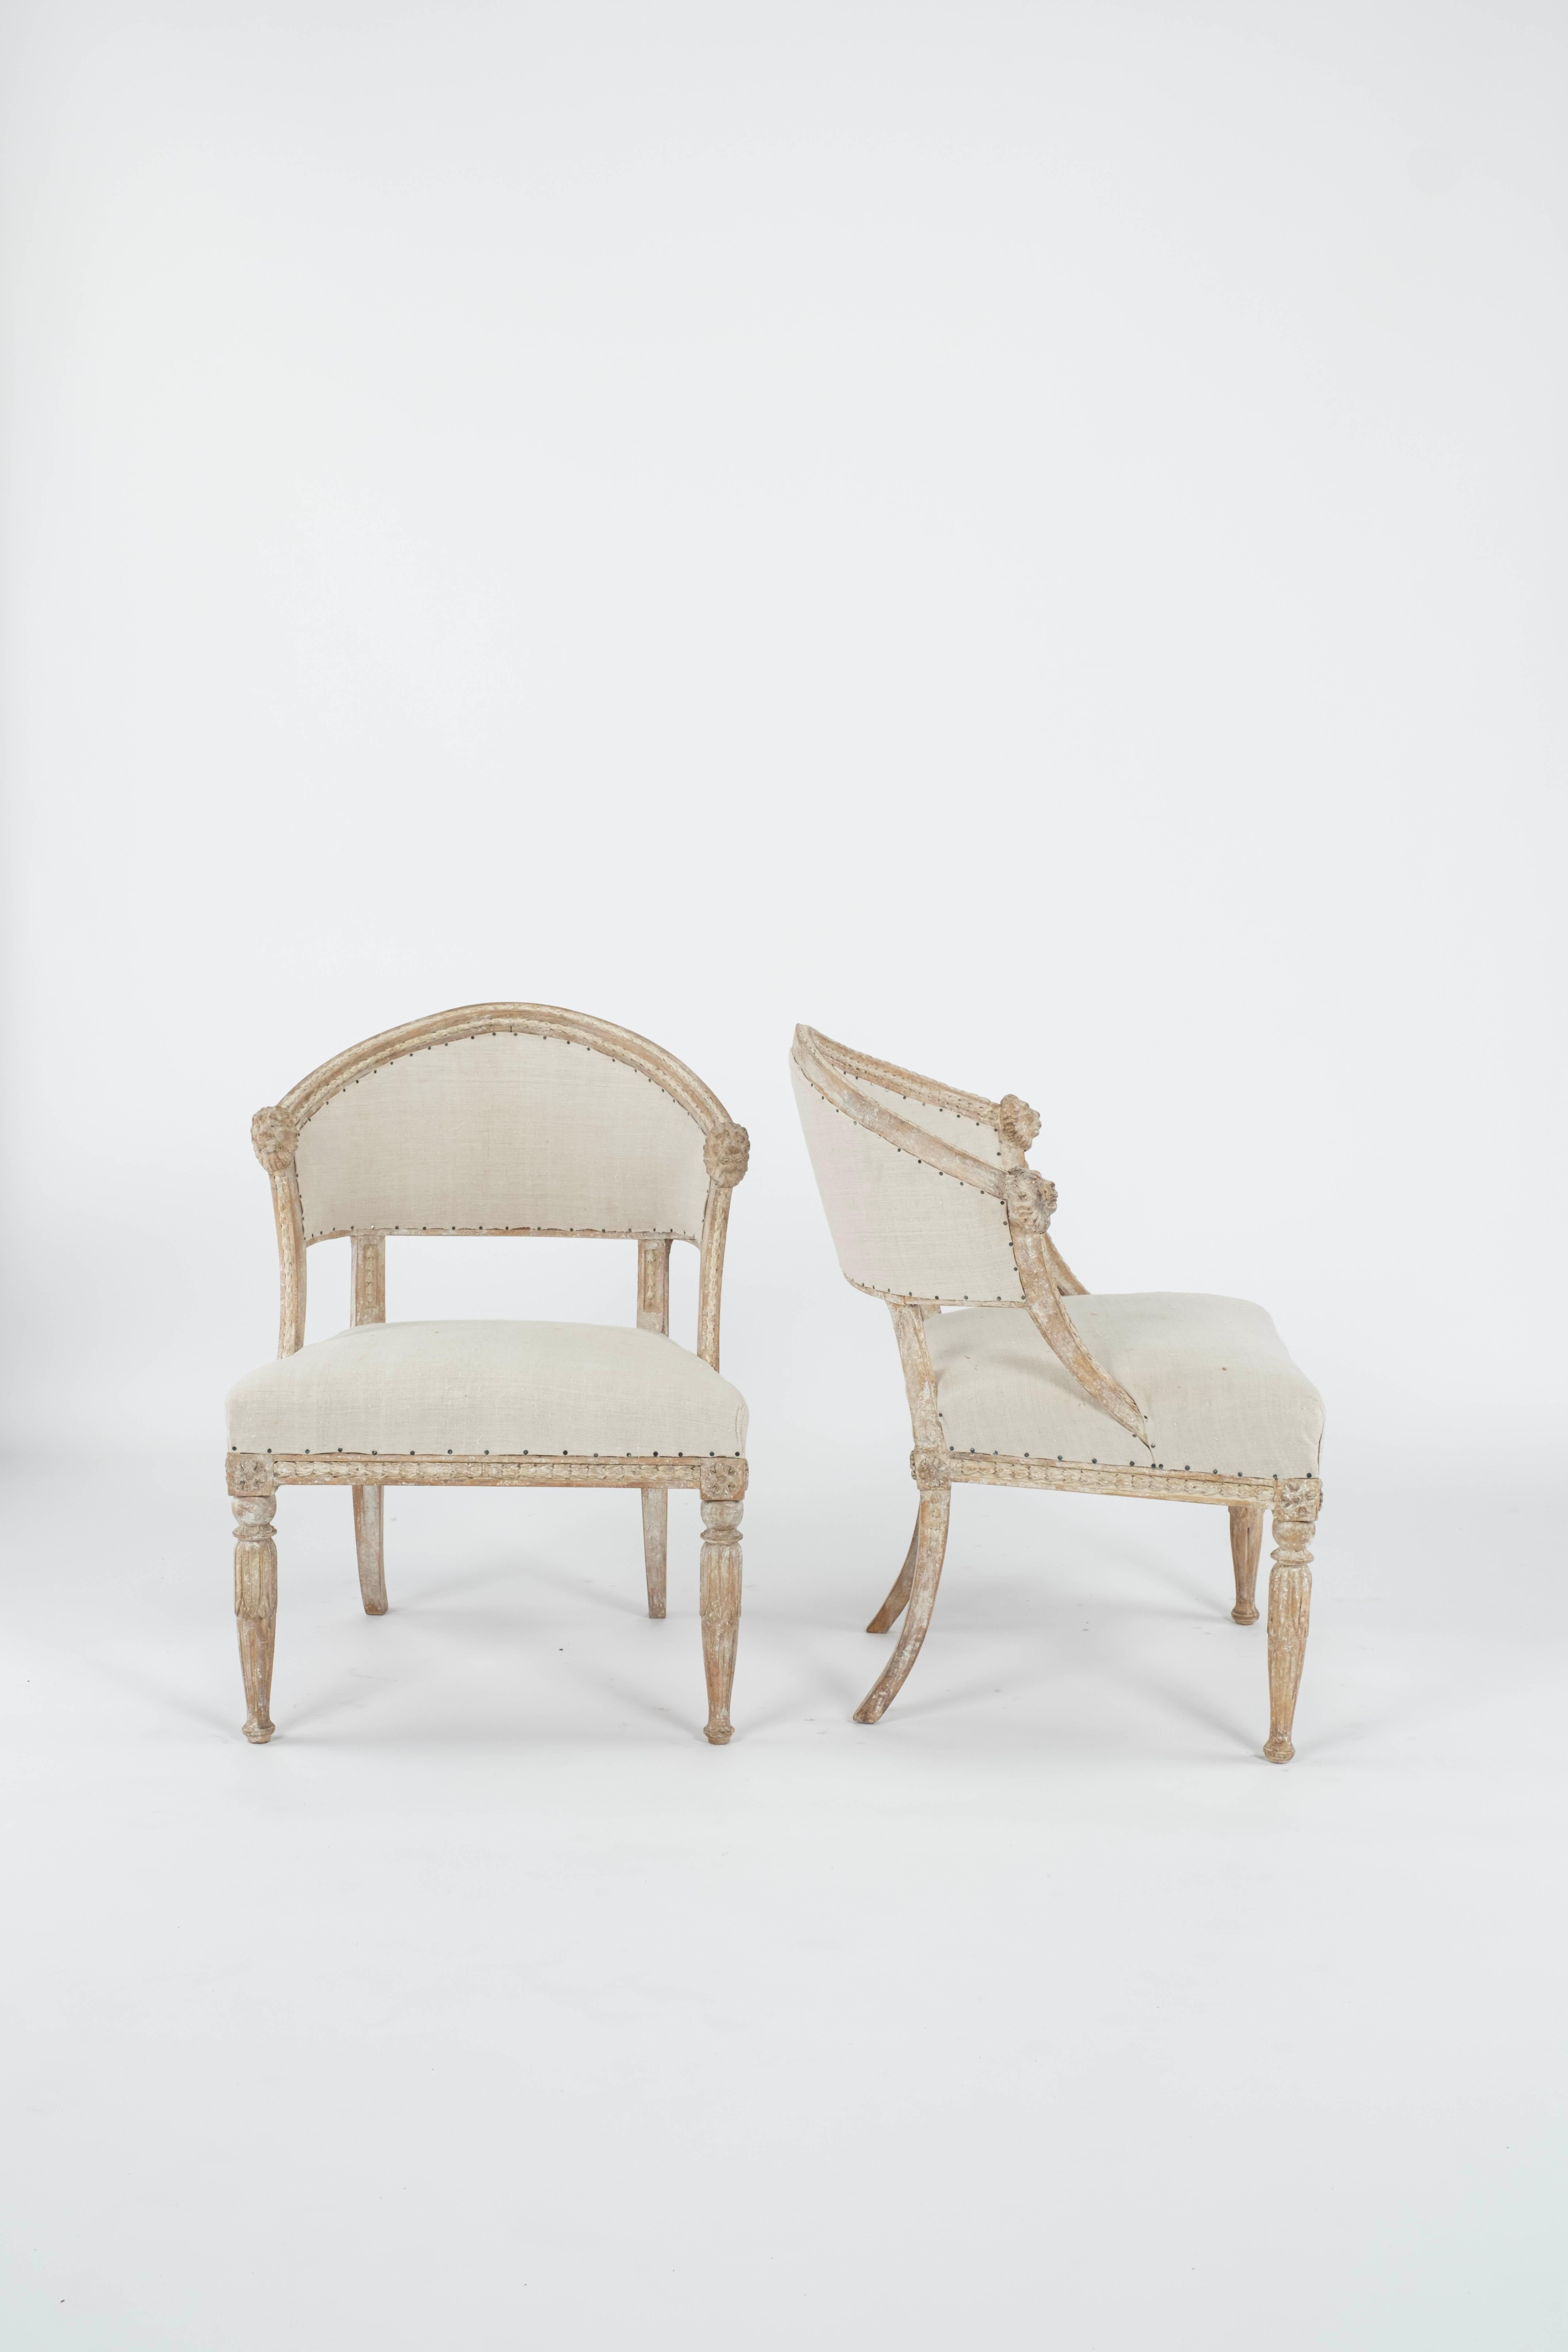 Wood Pair of 19th C. Swedish Gustavian Barrel Back Chairs For Sale